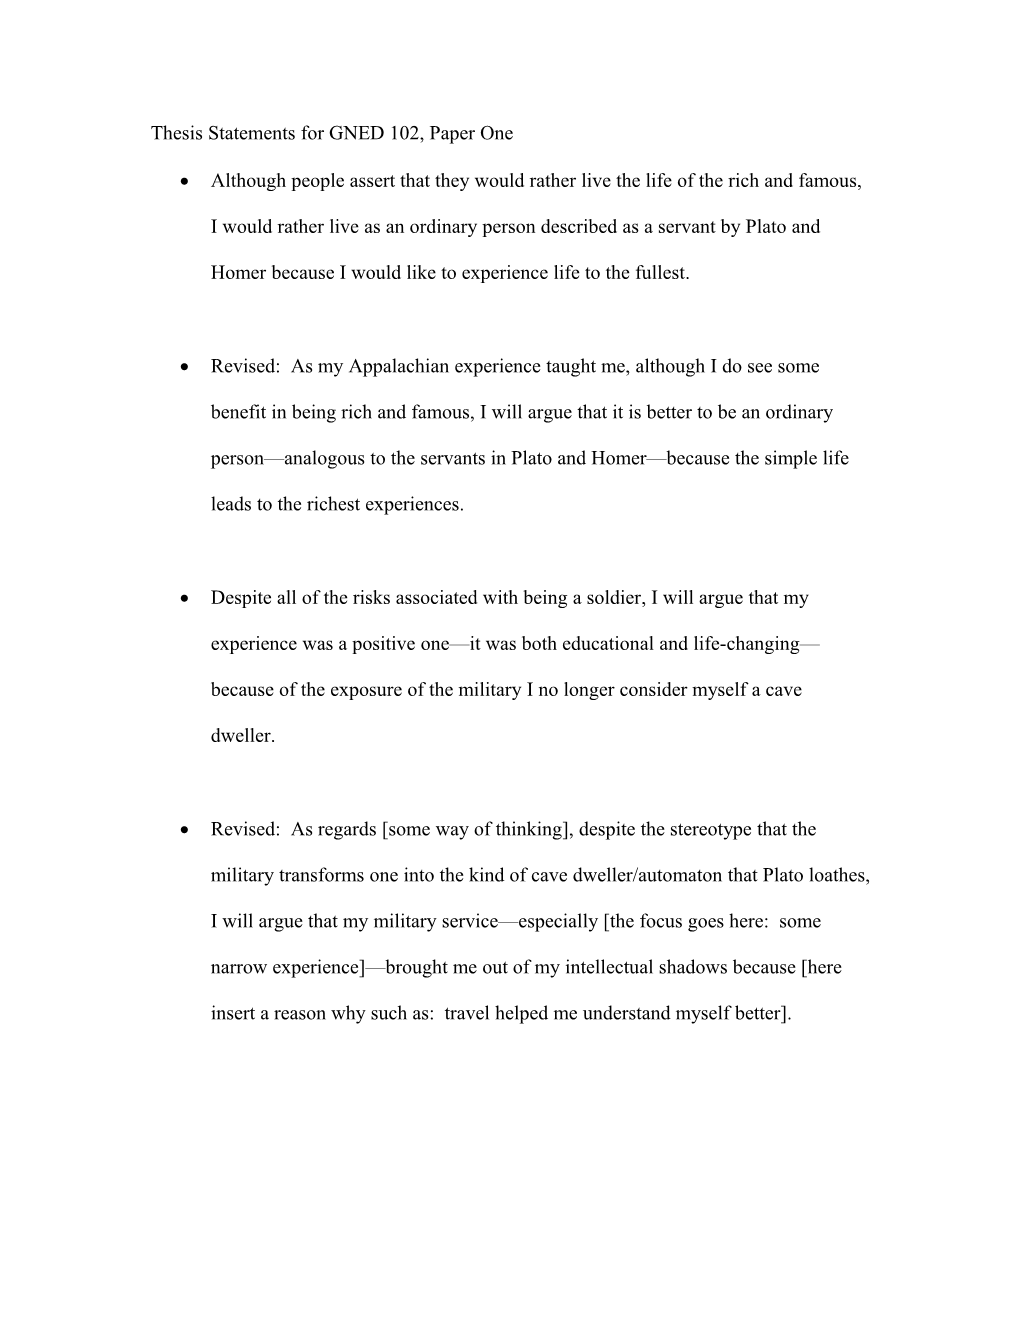 Thesis Statements for GNED 102, Paper One